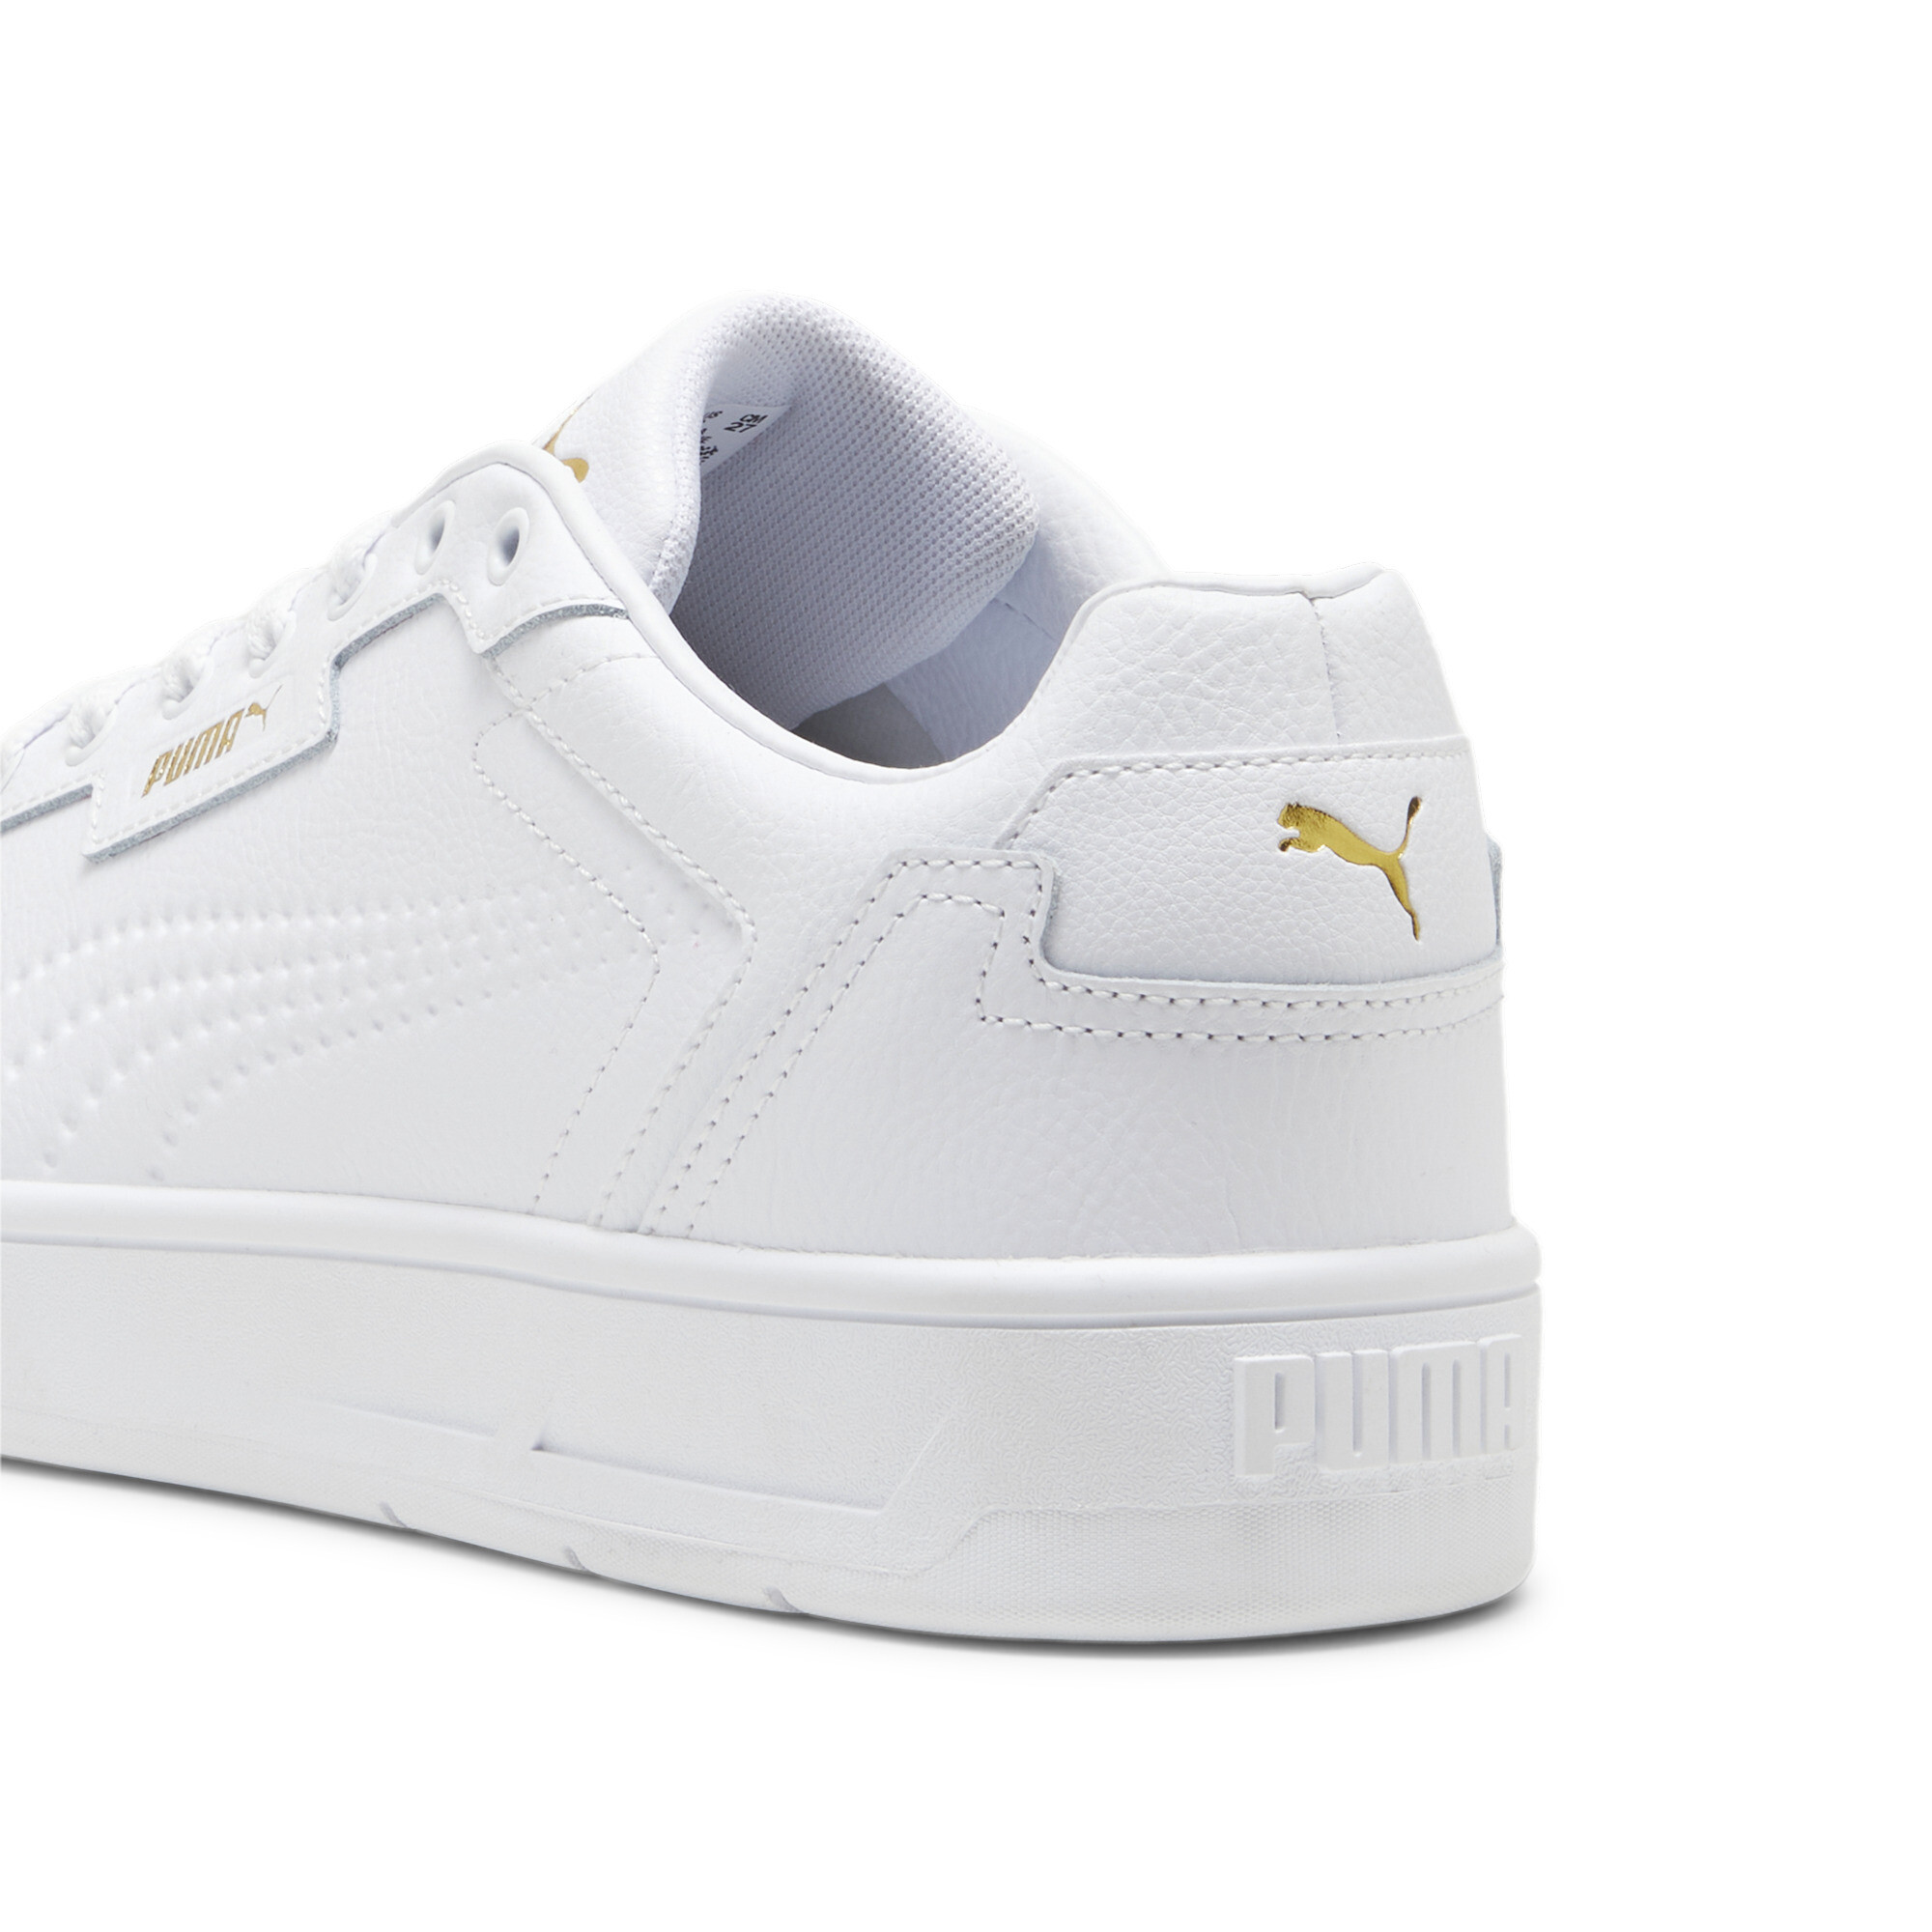 Puma Court Classic Lux Sneakers, White, Size 38, Shoes